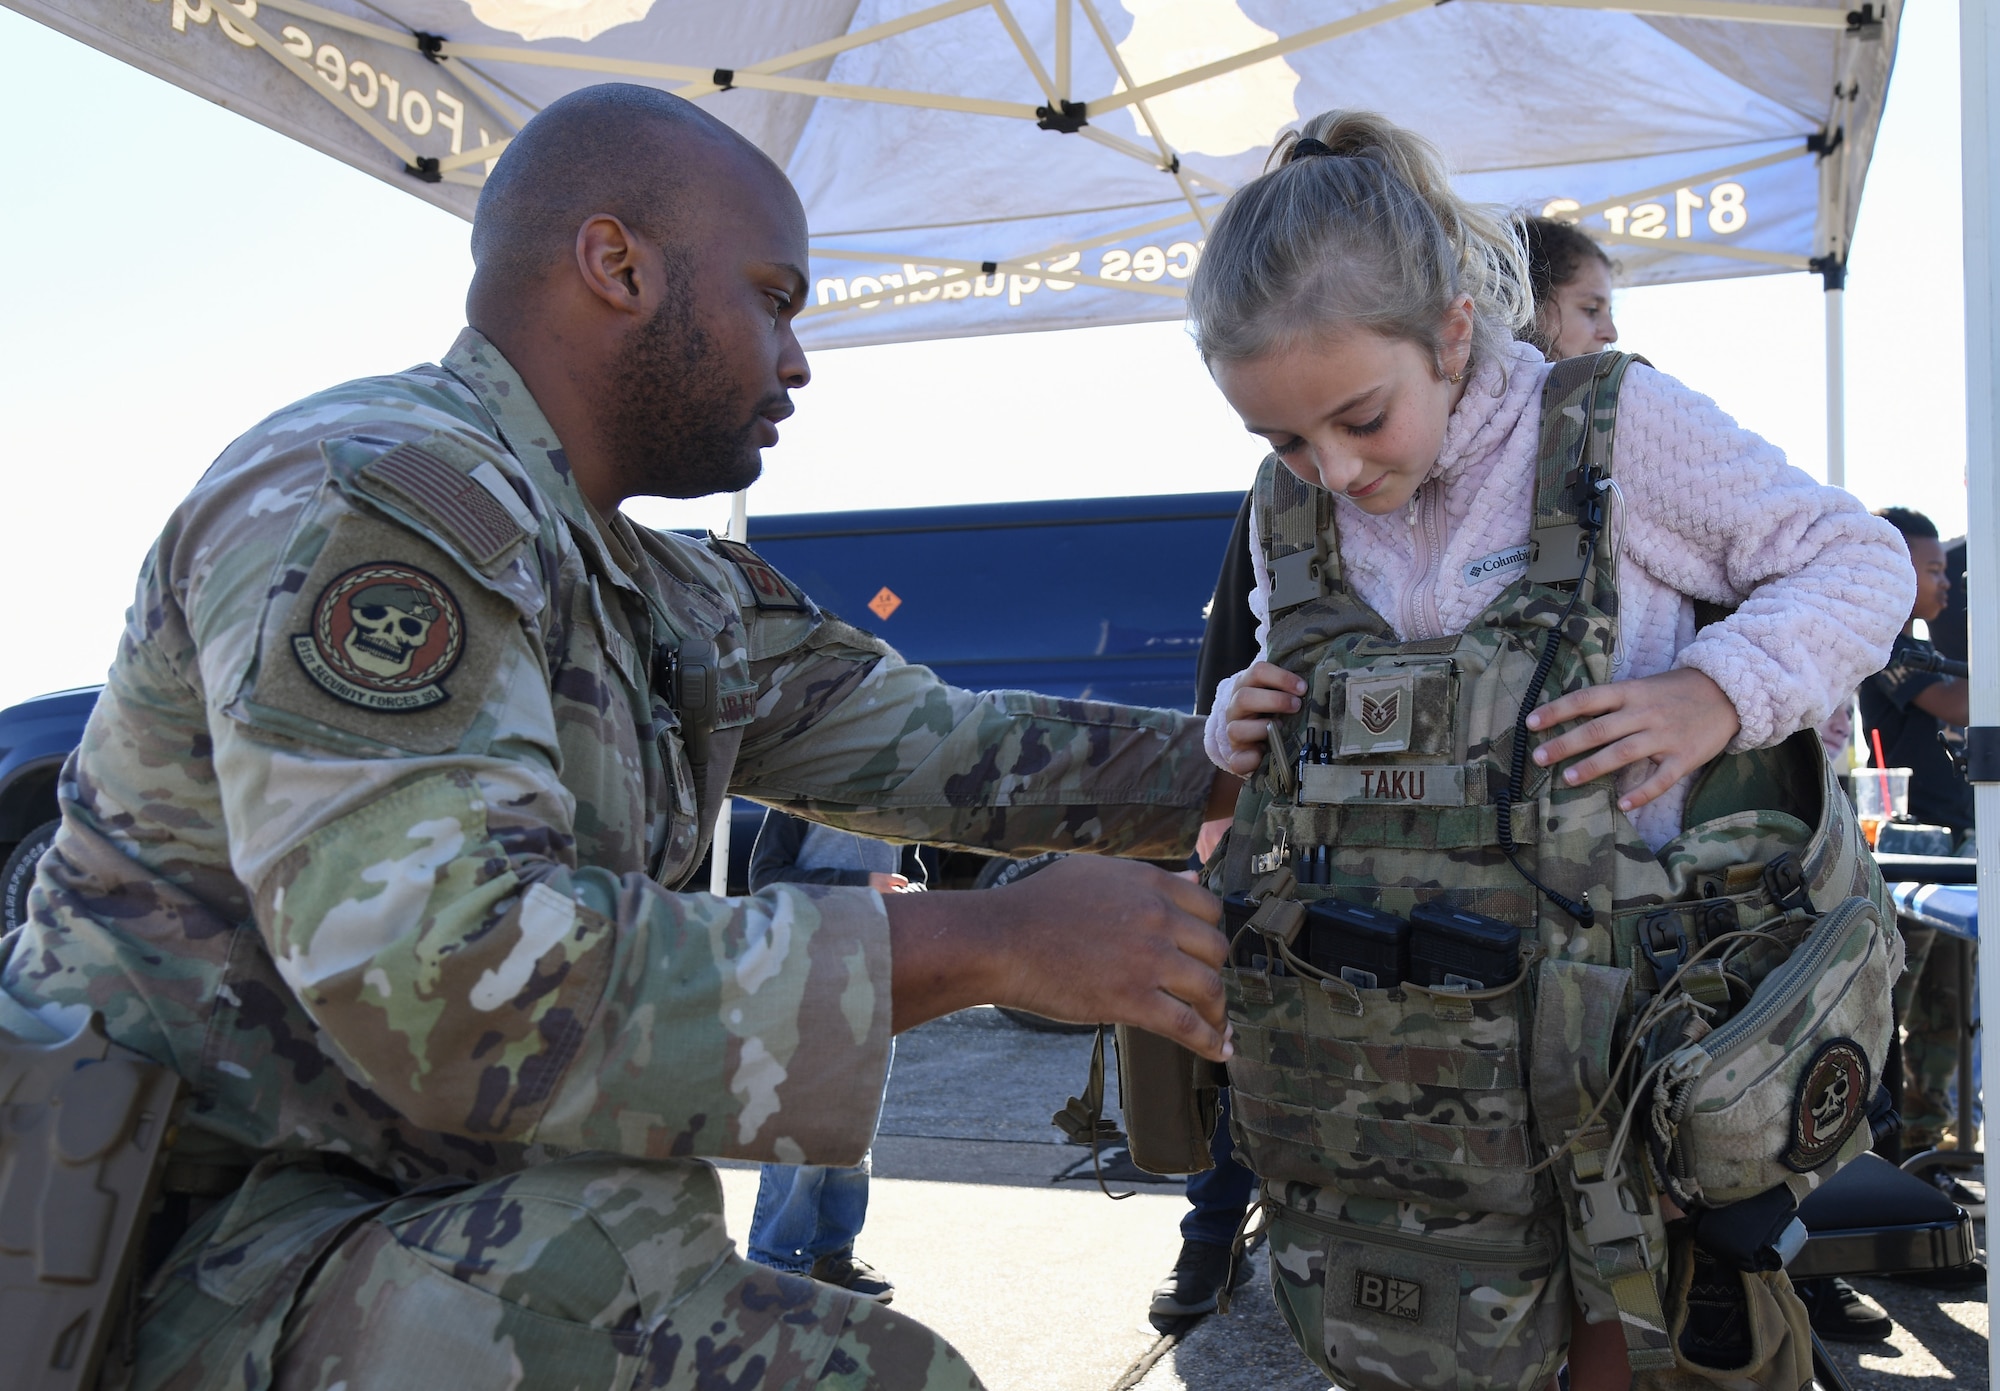 U.S. Air Force Tech. Sgt. Michael Taku, 81st Security Forces Squadron flight sergeant, secures an individual ballistic armor vest on Harper Prentice, daughter of Capt. Heather Prentice, 81st Operational Medical Readiness Squadron family advocacy officer, during Operation Hero at Keesler Air Force Base, Mississippi, March 4, 2023.